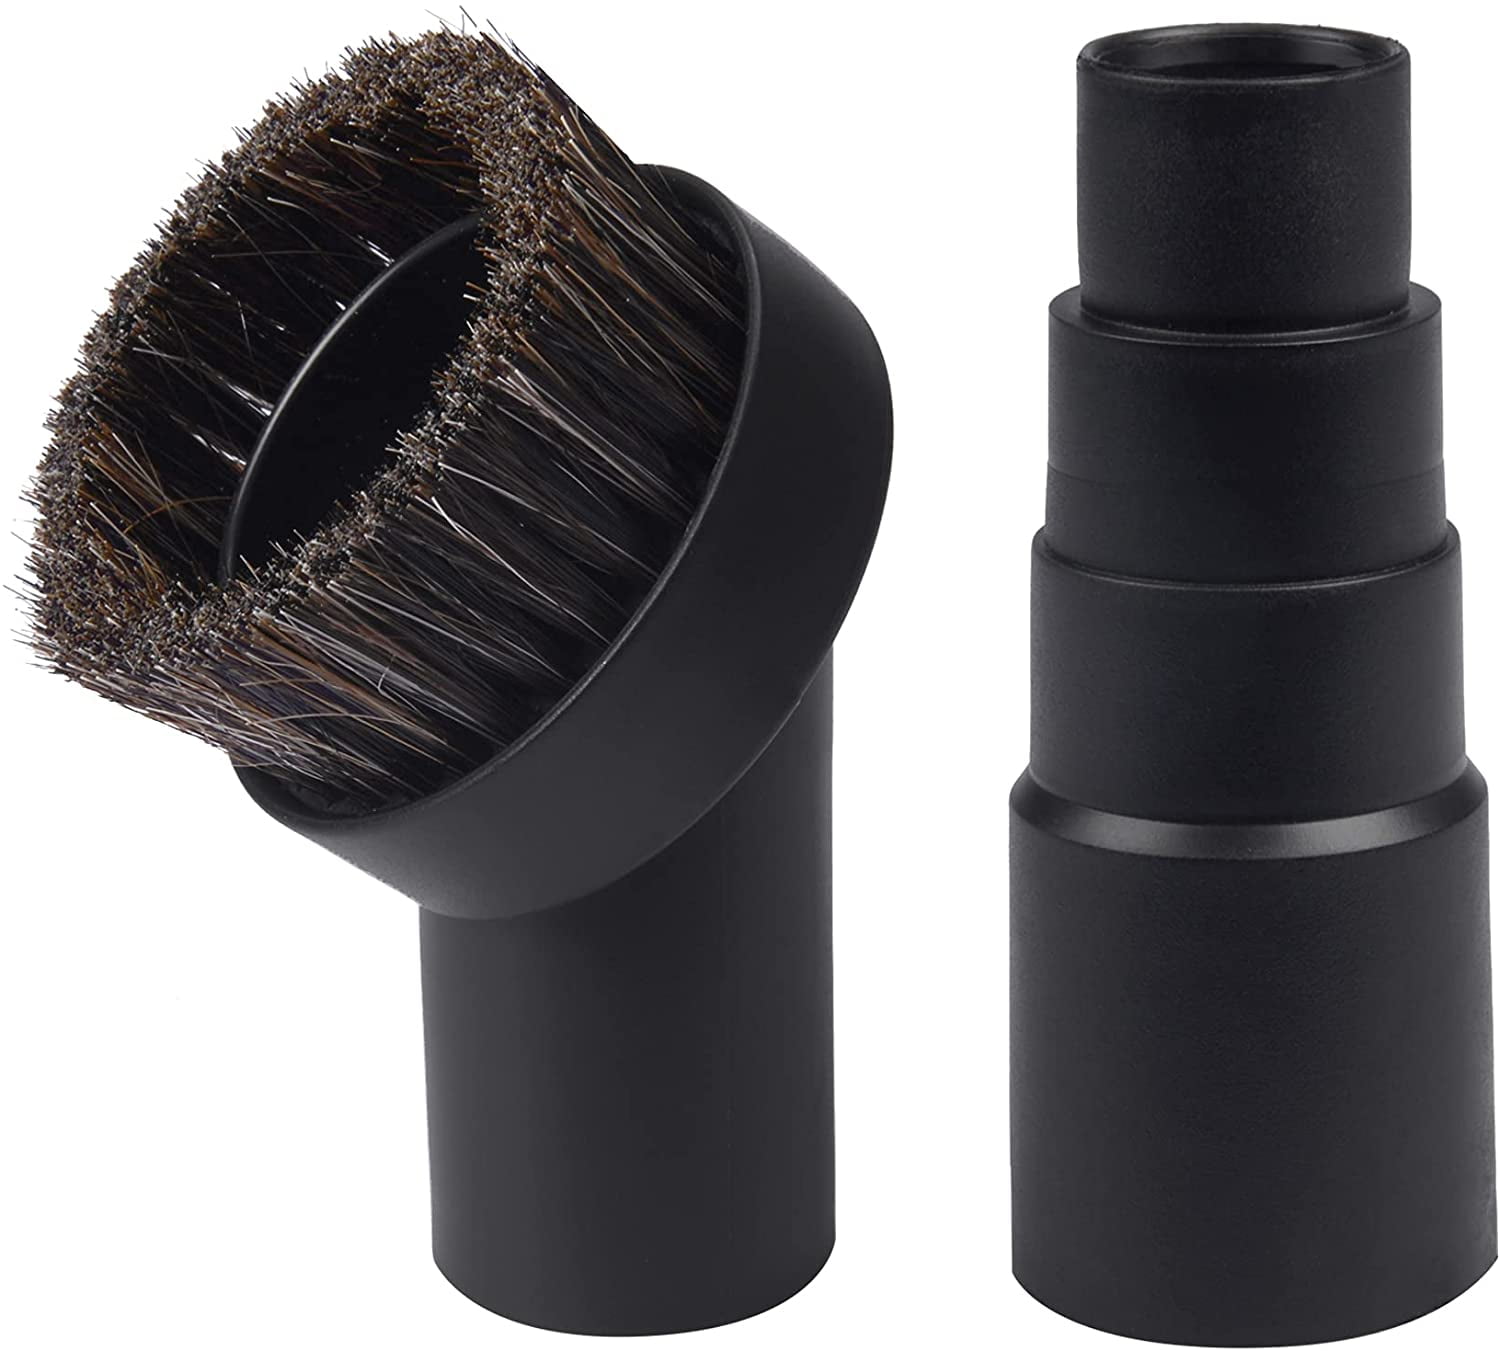 Vacuum Cleaner Dusting Brush Dust Attachment Tool For Round Horse Hair LP 